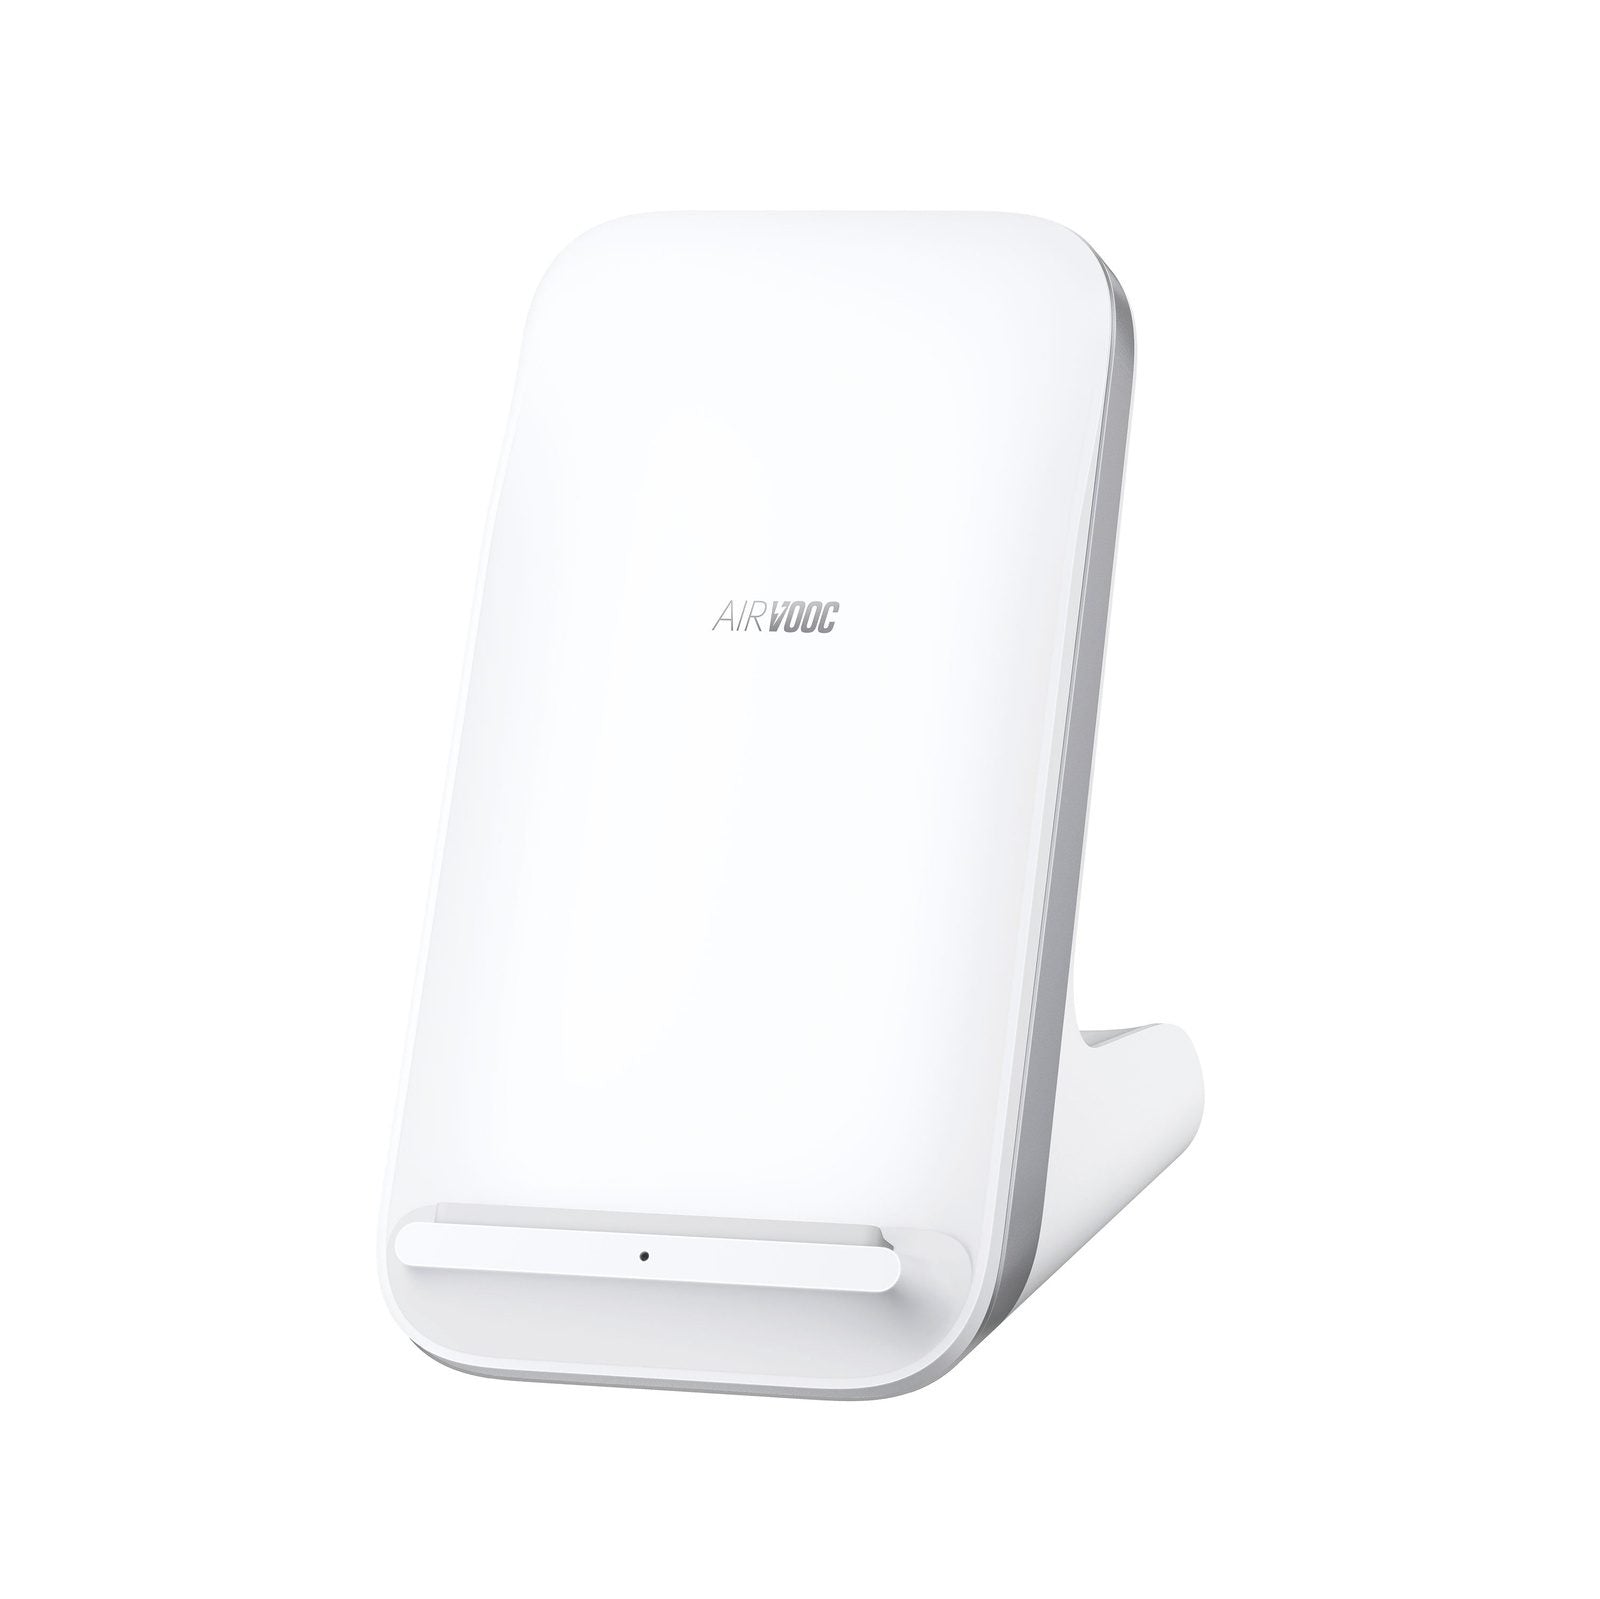 OPPO 50W AIRVOOC Charger - OPPO Official Store